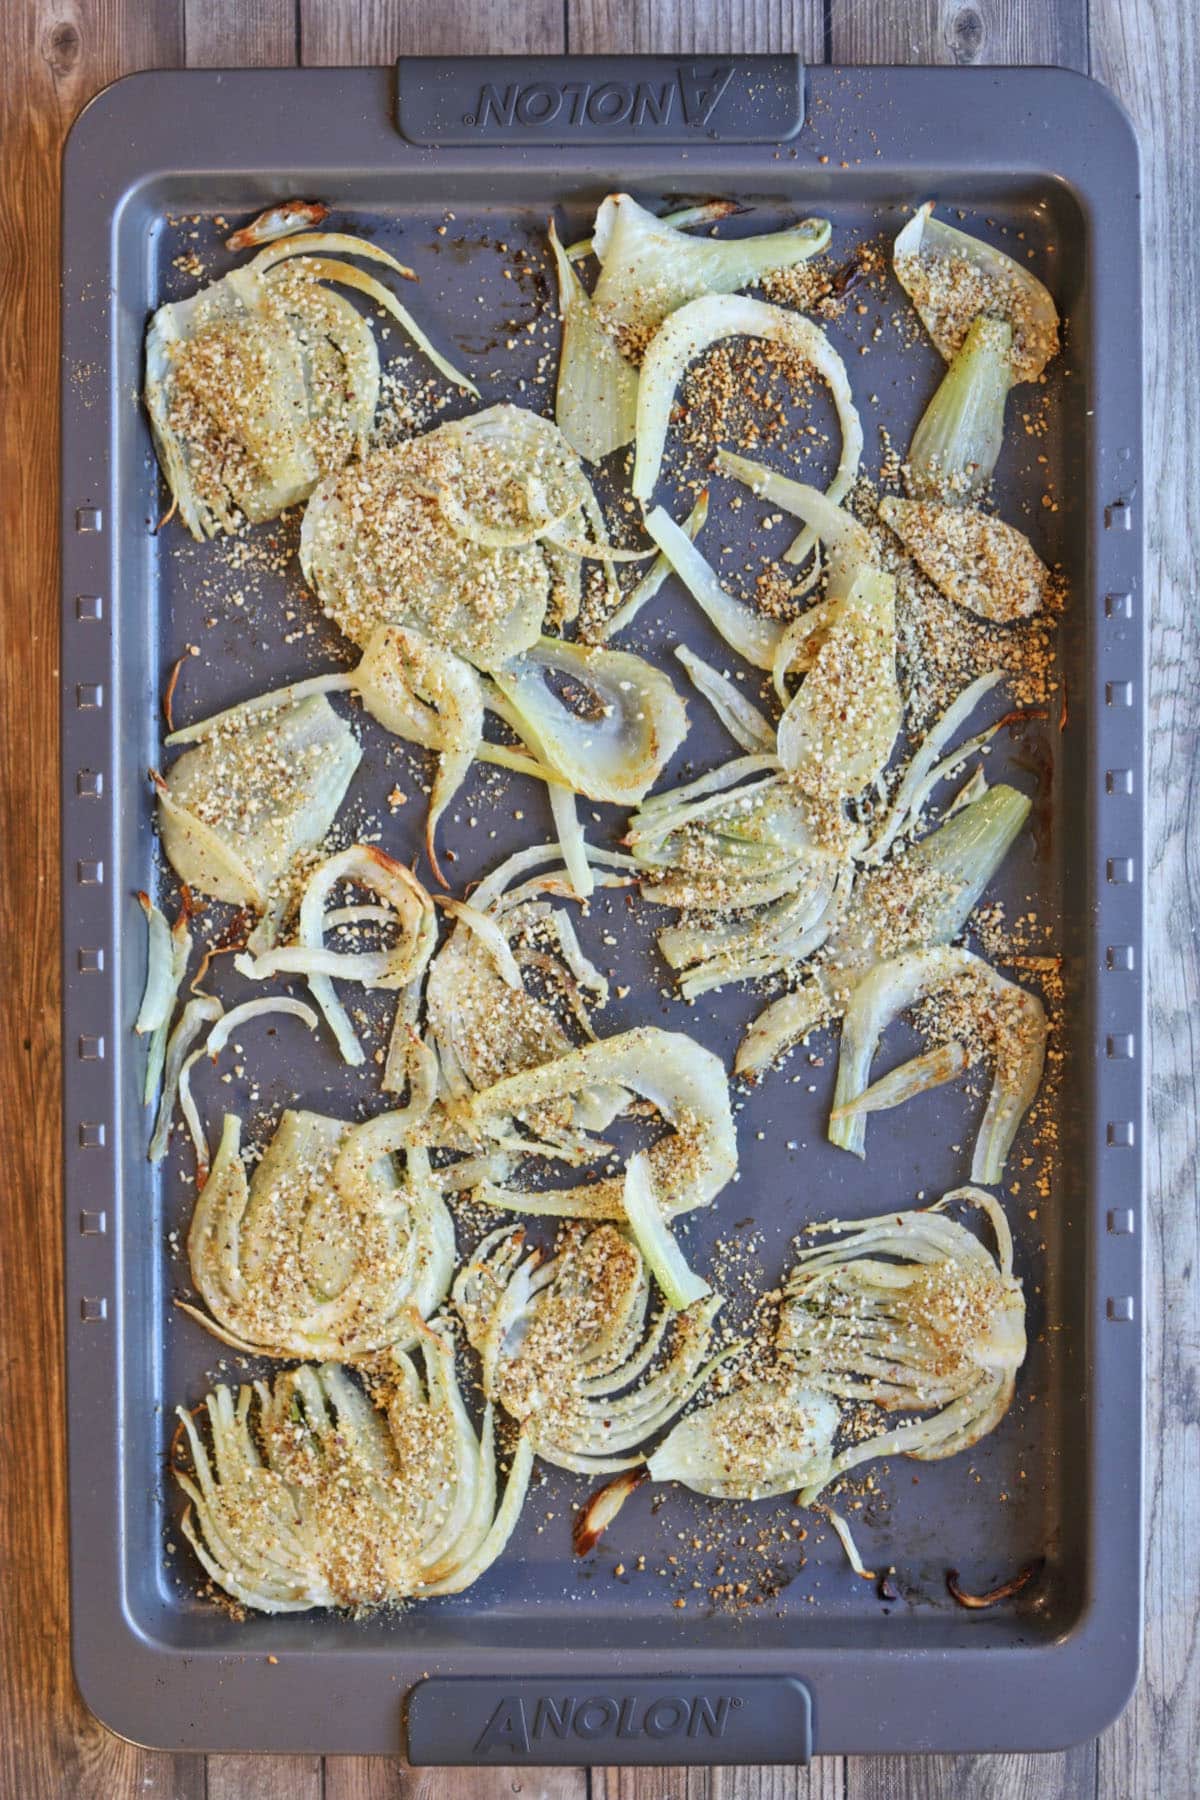 Fennel covered in vegan parmesan cheese on baking sheet.